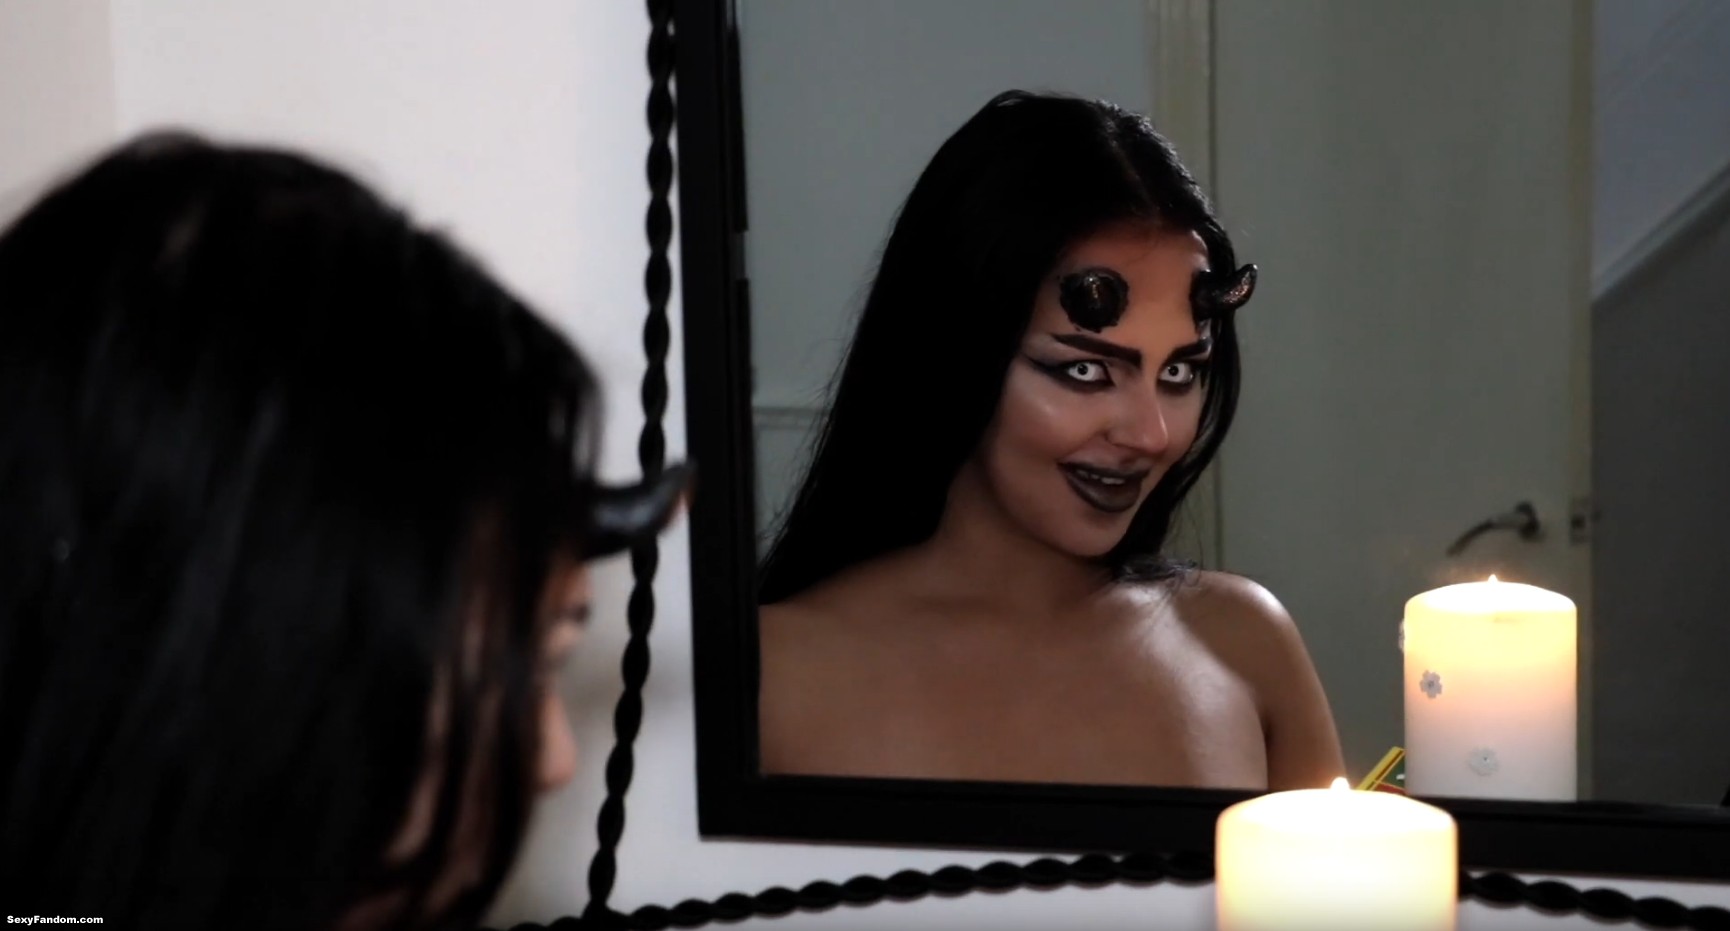 This Sexy Dark Angel Makeup Will Have You Feeling Devilish